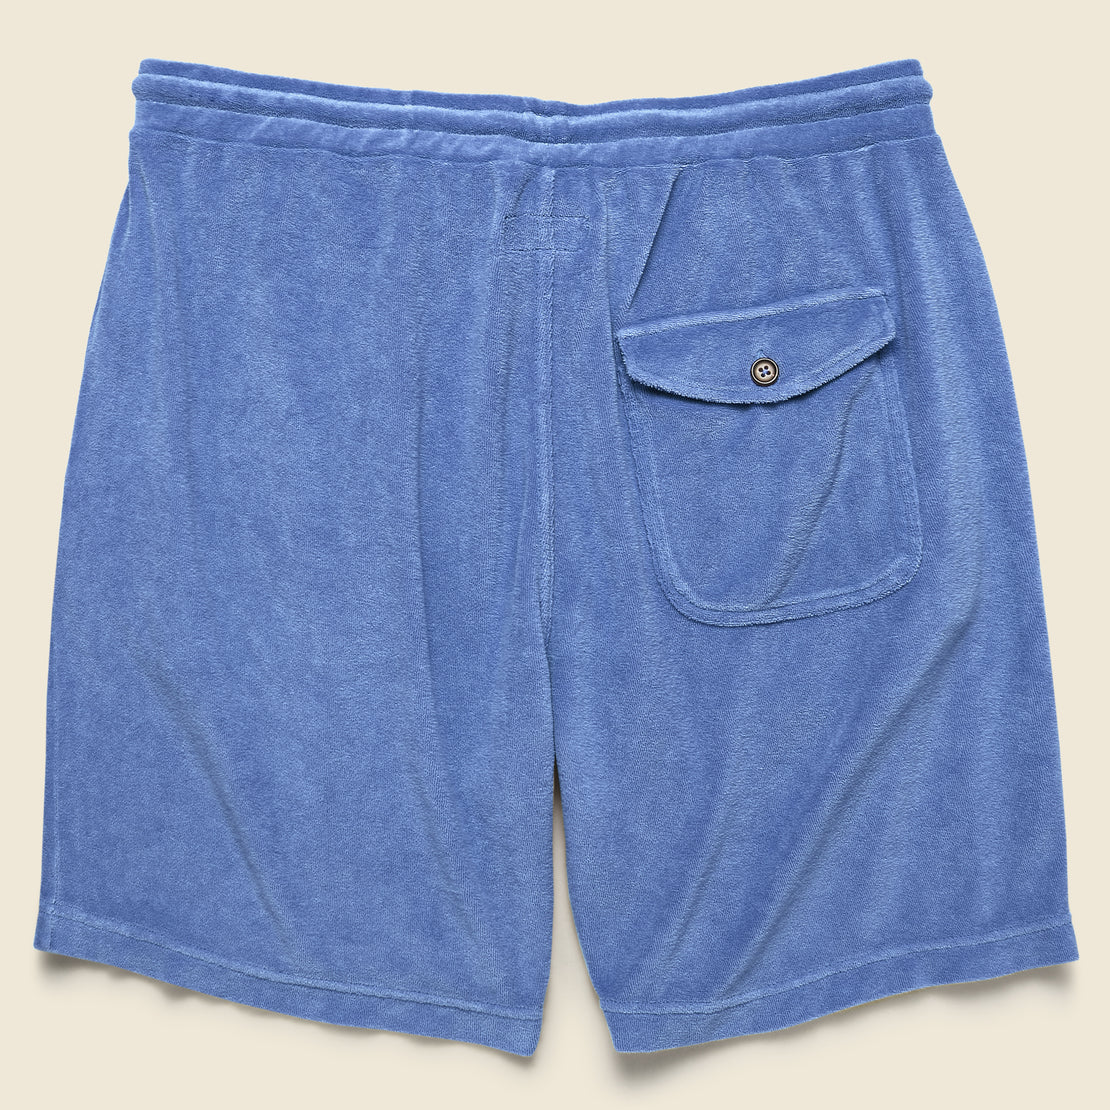 Terry Fleece Beach Short - Blue - Universal Works - STAG Provisions - Shorts - Lounge